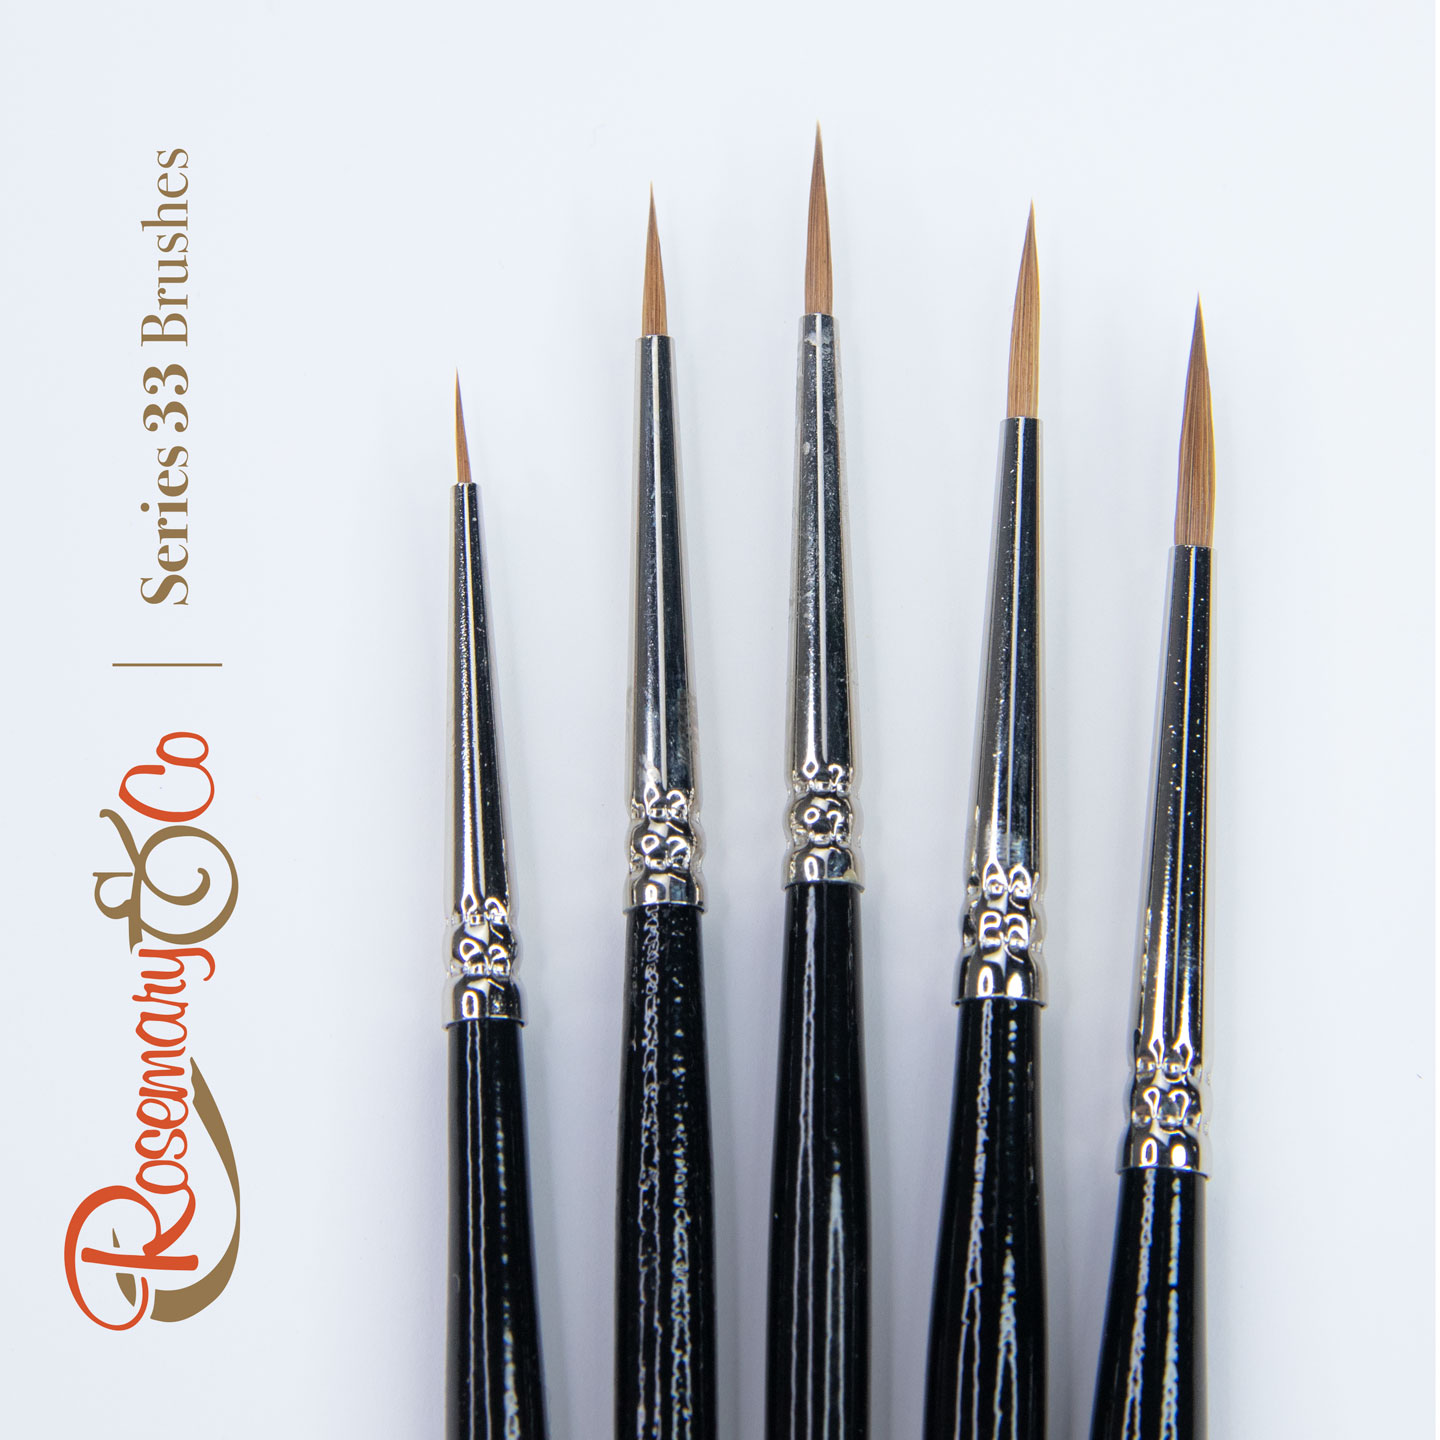 Rosemary & Co Artists Brushes